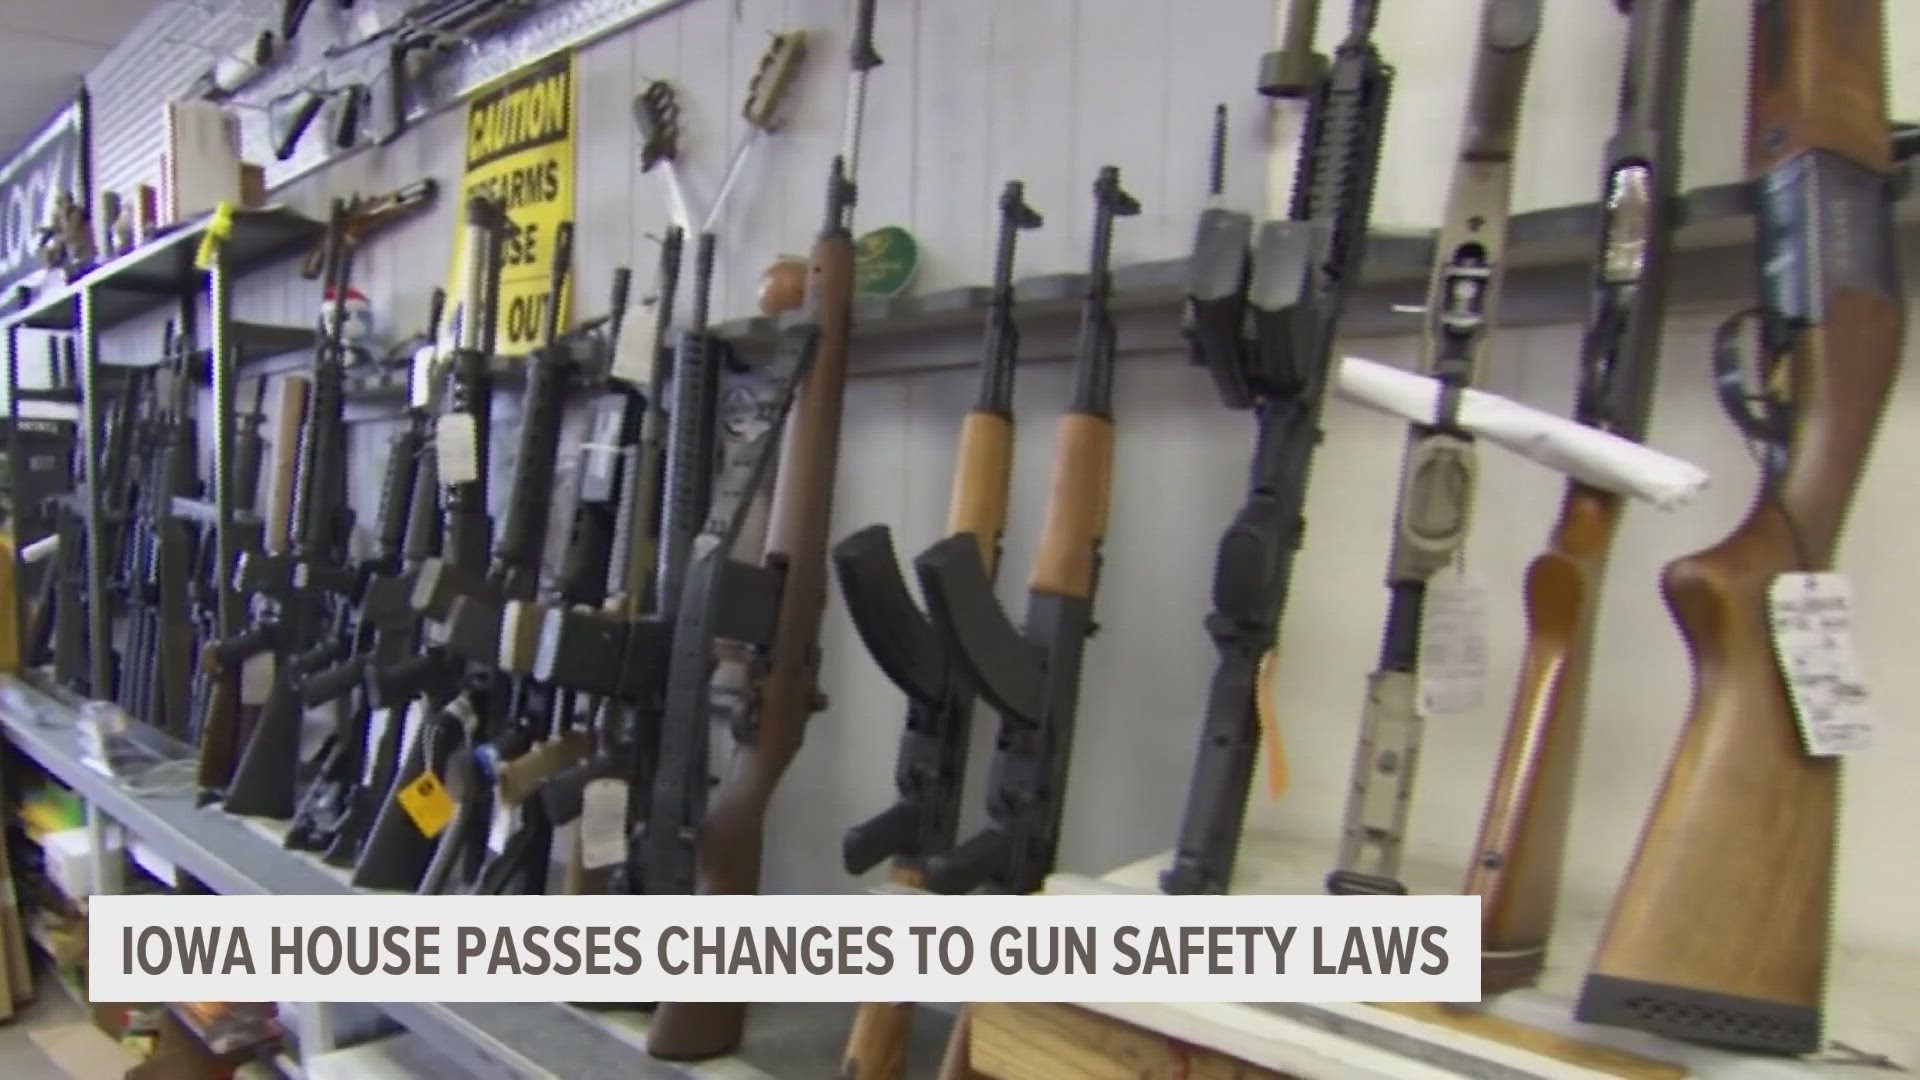 The bill requires school districts and public universities and colleges to allow weapons onto their grounds.